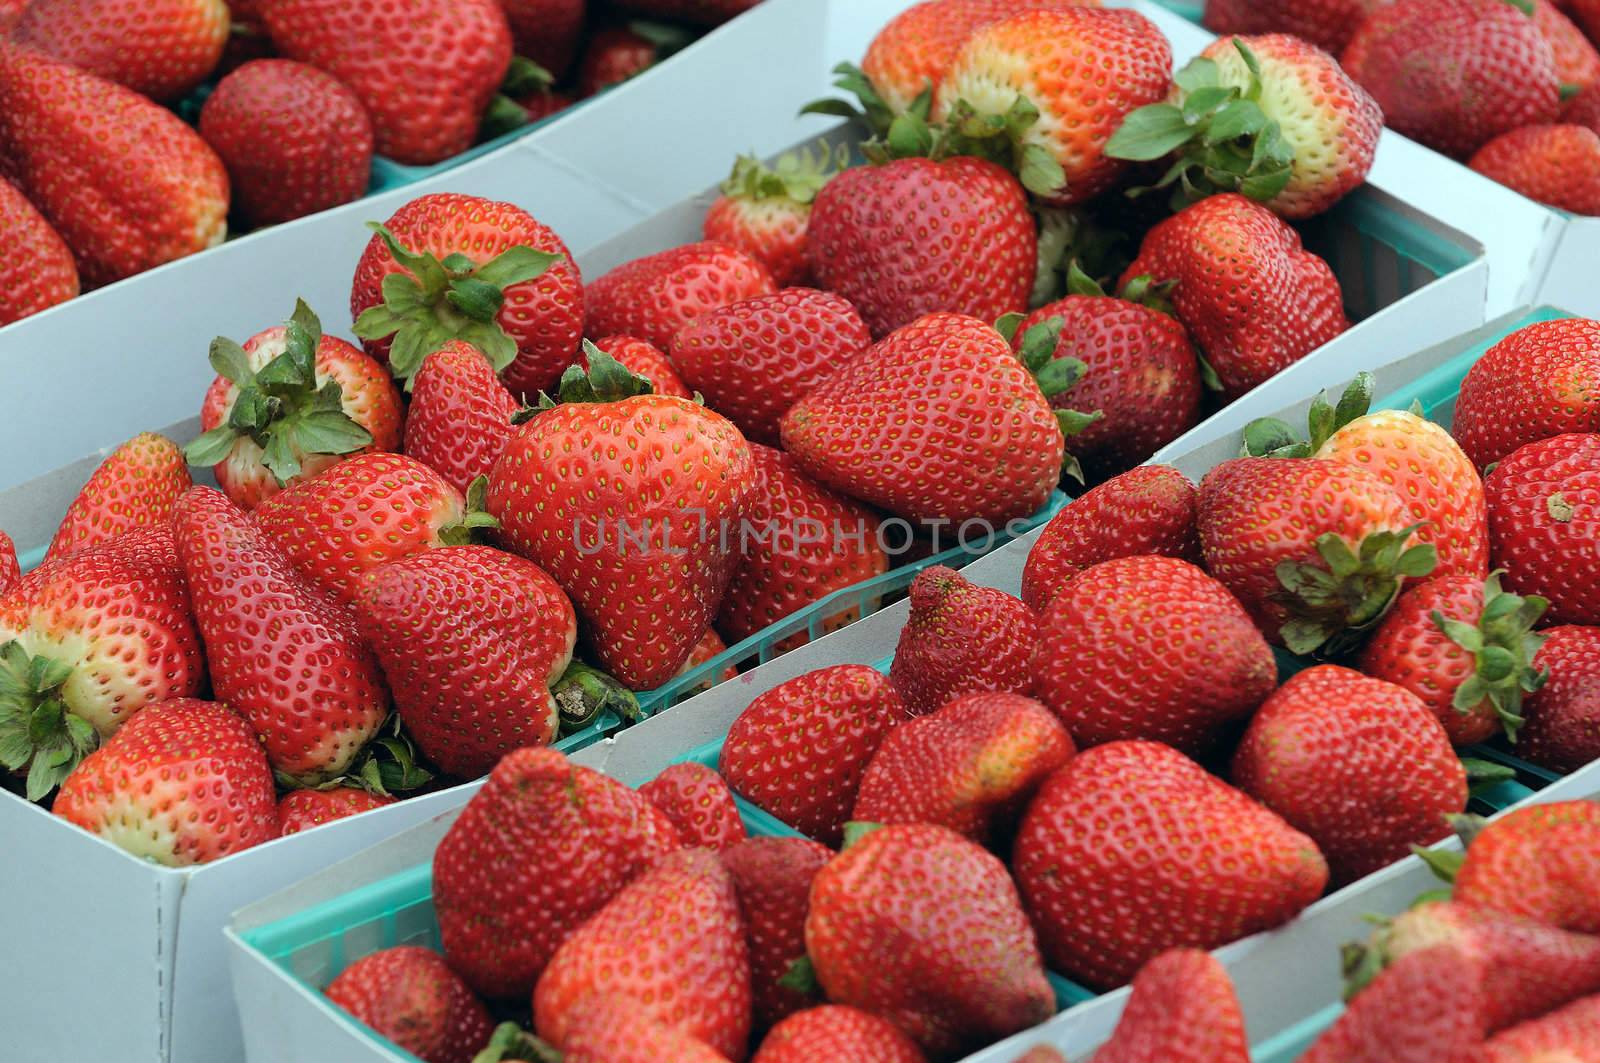 Freshly grown strawberries at a local market